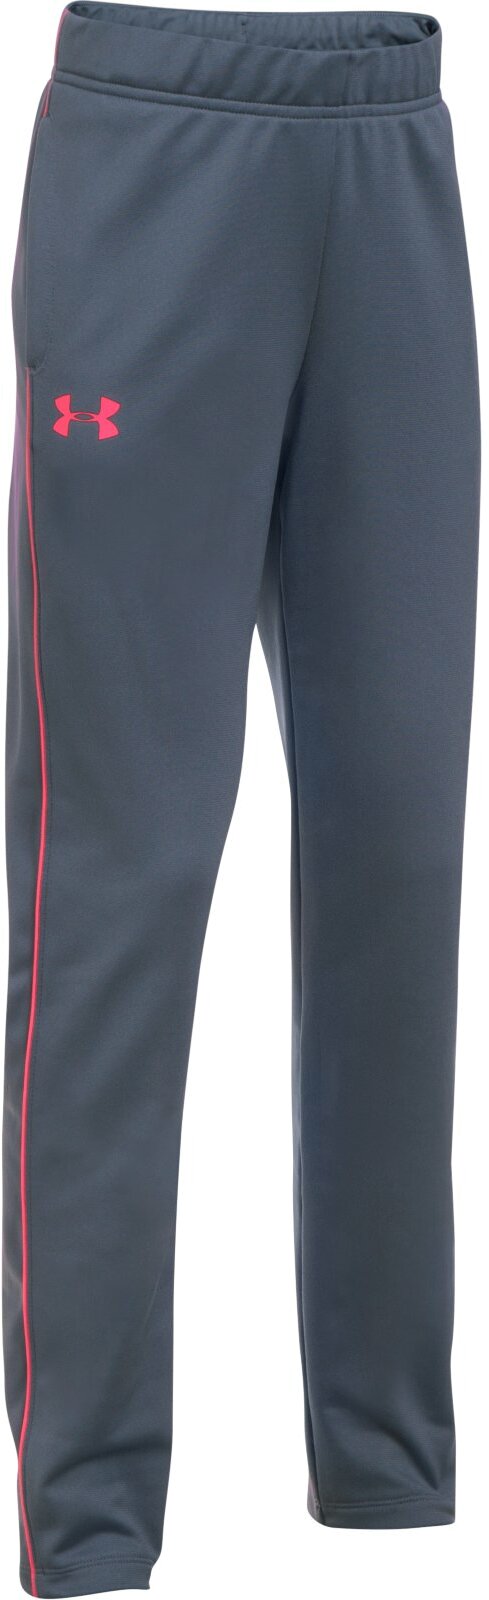 Детские брюки Under Armour Track Knit OH 1299979-962